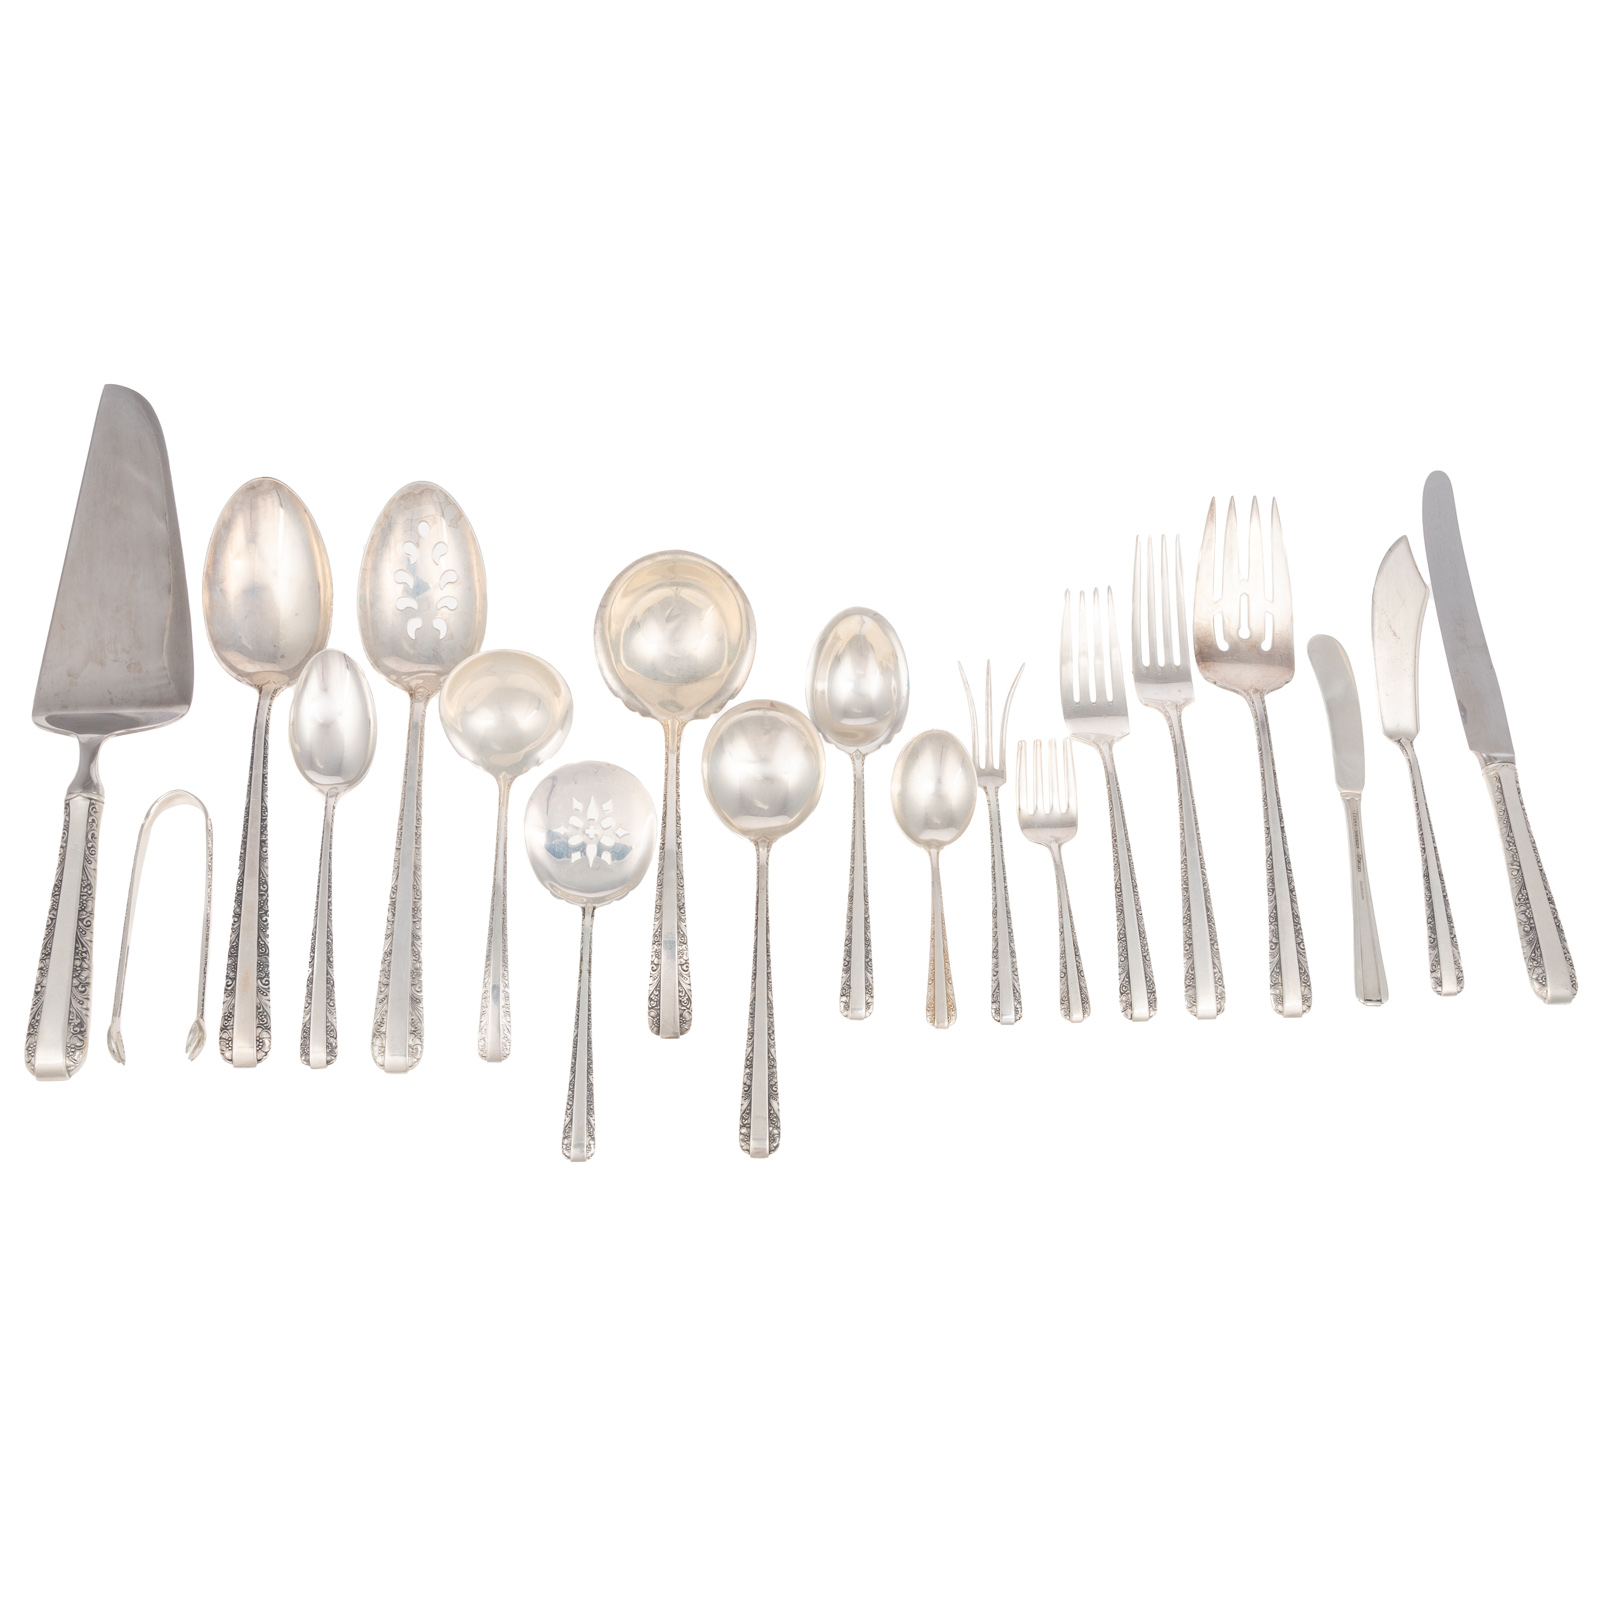 TOWLE STERLING "CANDLELIGHT" FLATWARE